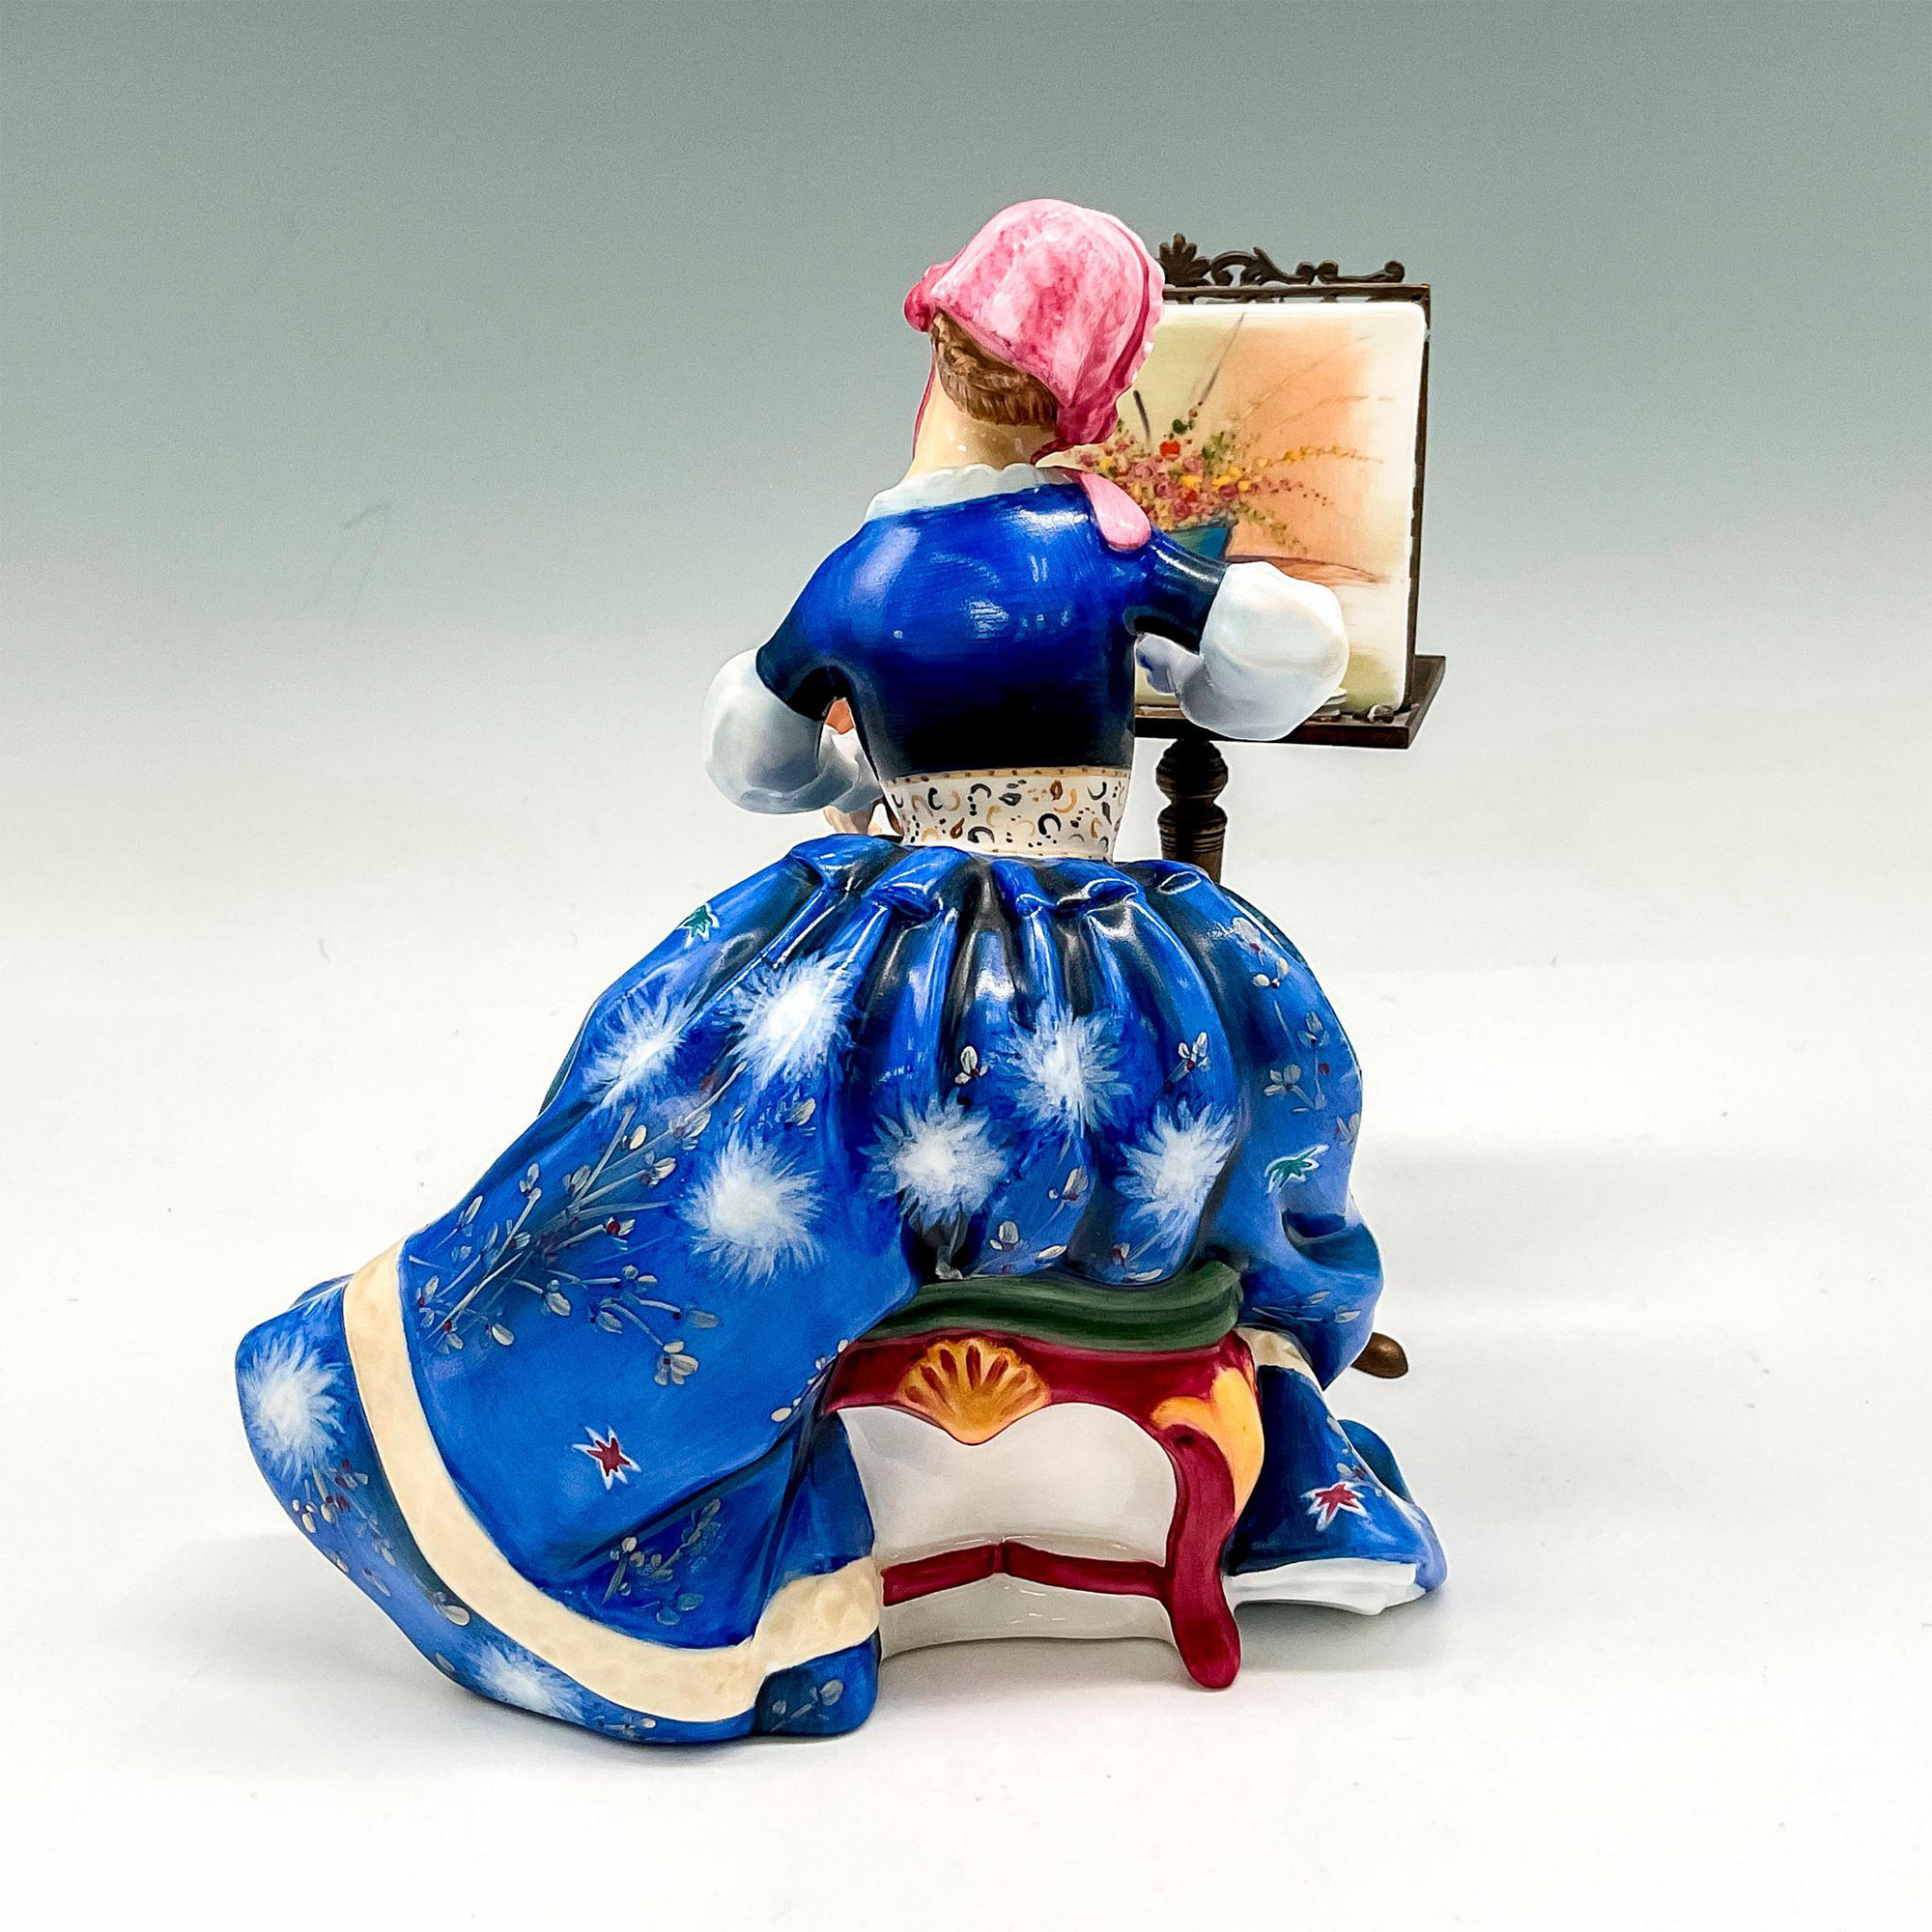 Painting HN3012 - Royal Doulton Figurine - Image 2 of 3